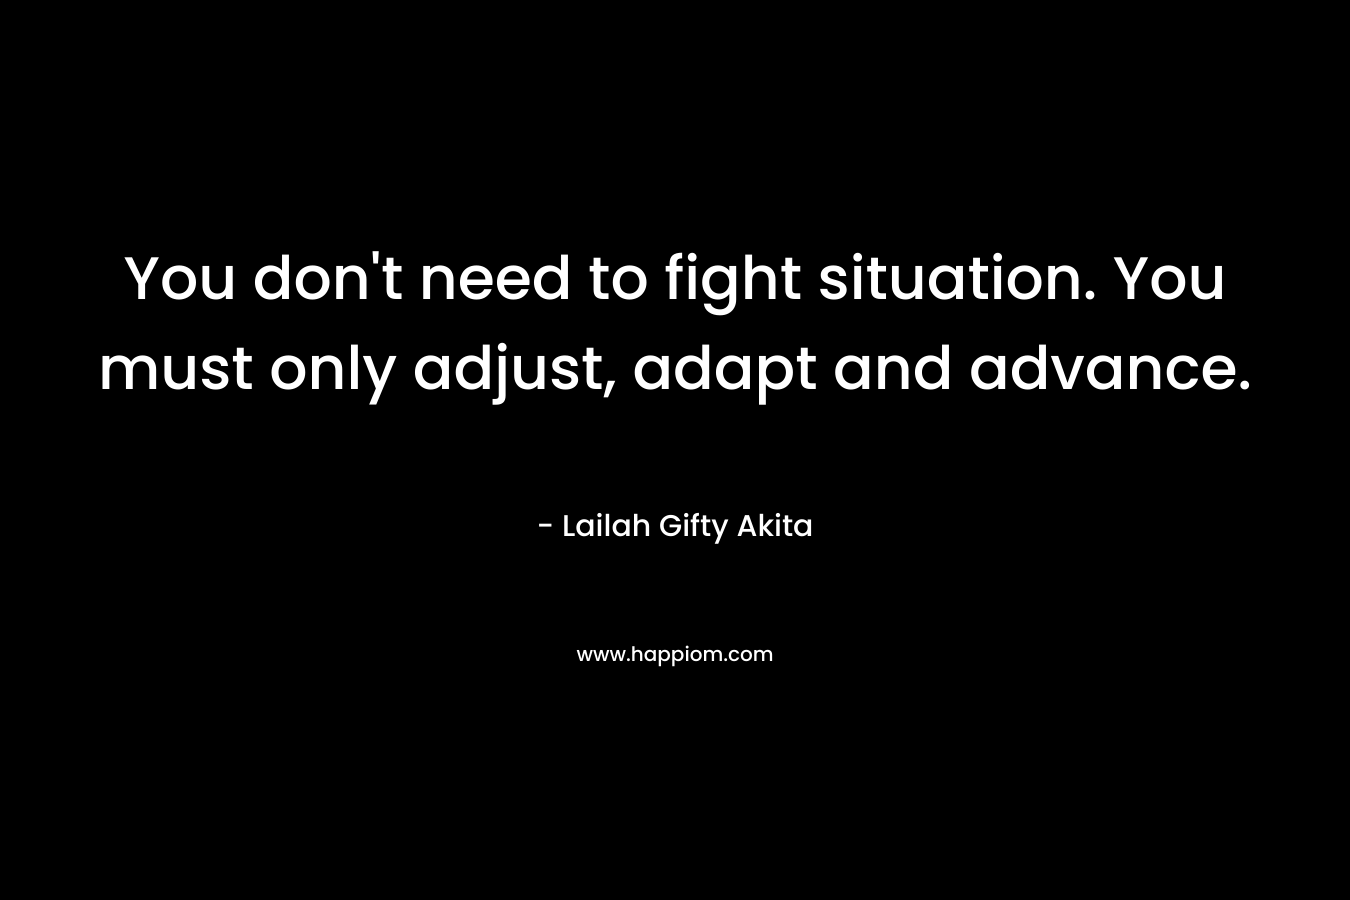 You don’t need to fight situation. You must only adjust, adapt and advance. – Lailah Gifty Akita